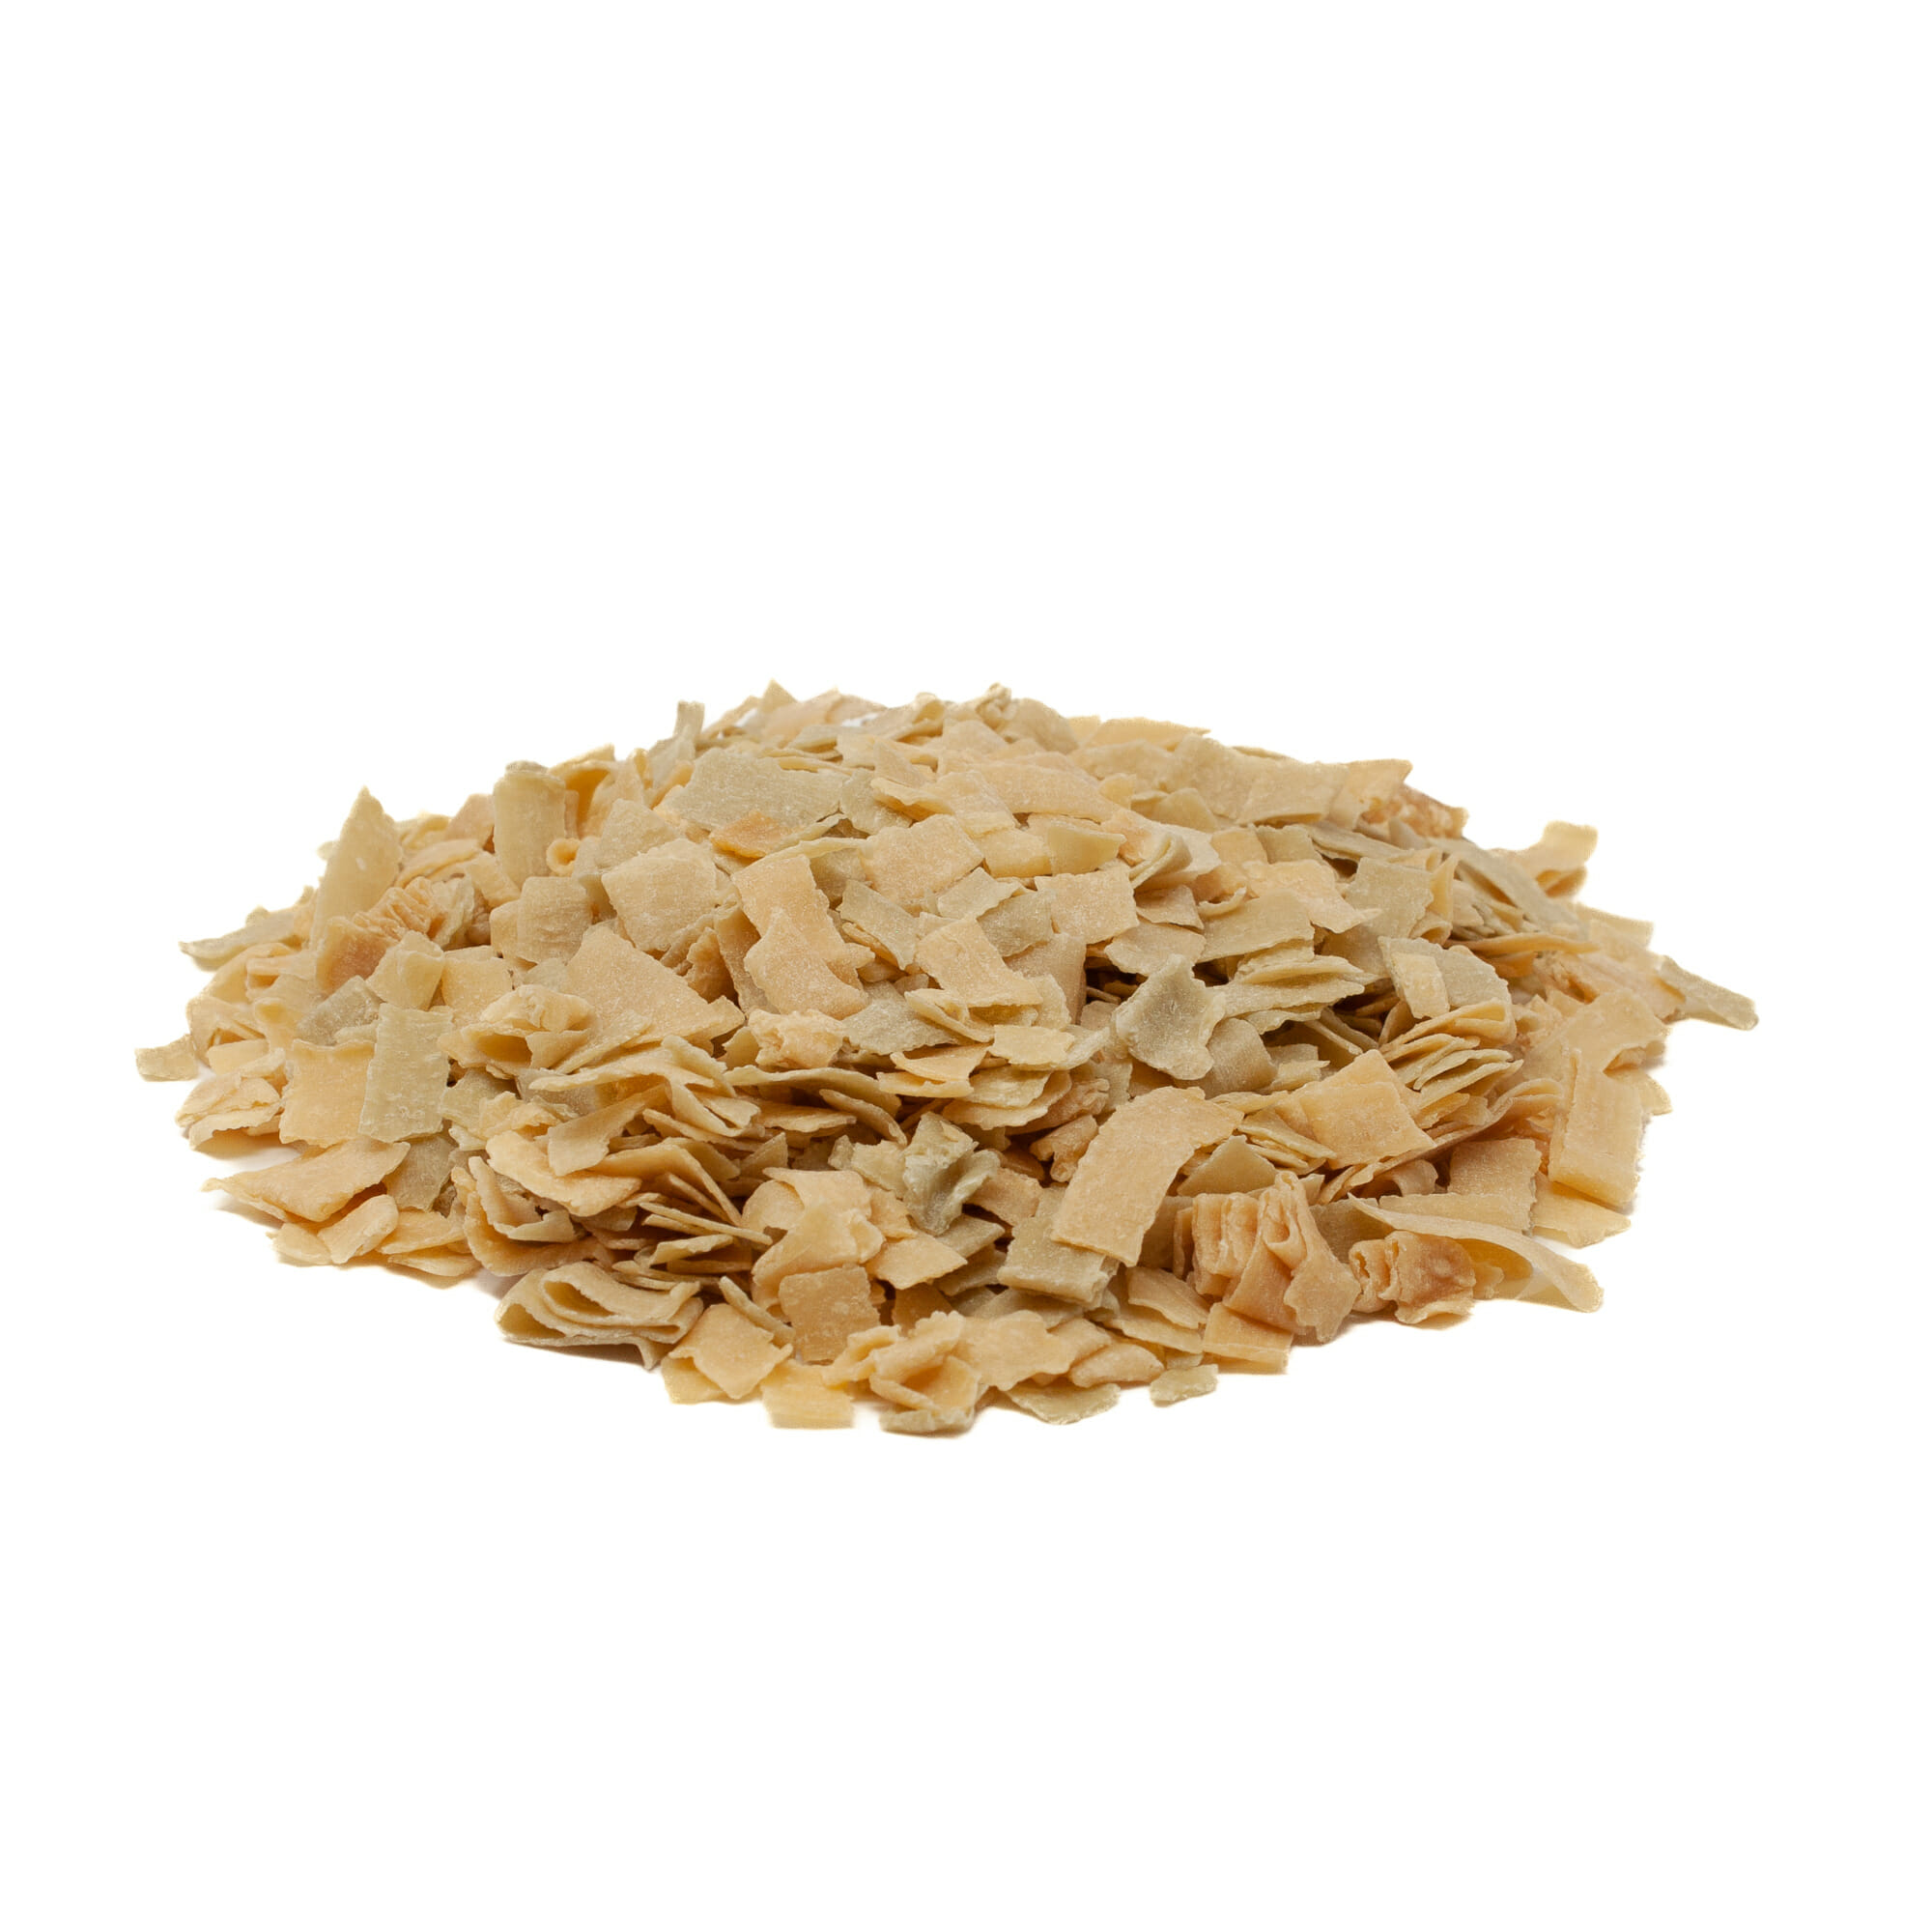 Grated Olive Oil Soap Flakes — Santa Fe Wool & Supply Co